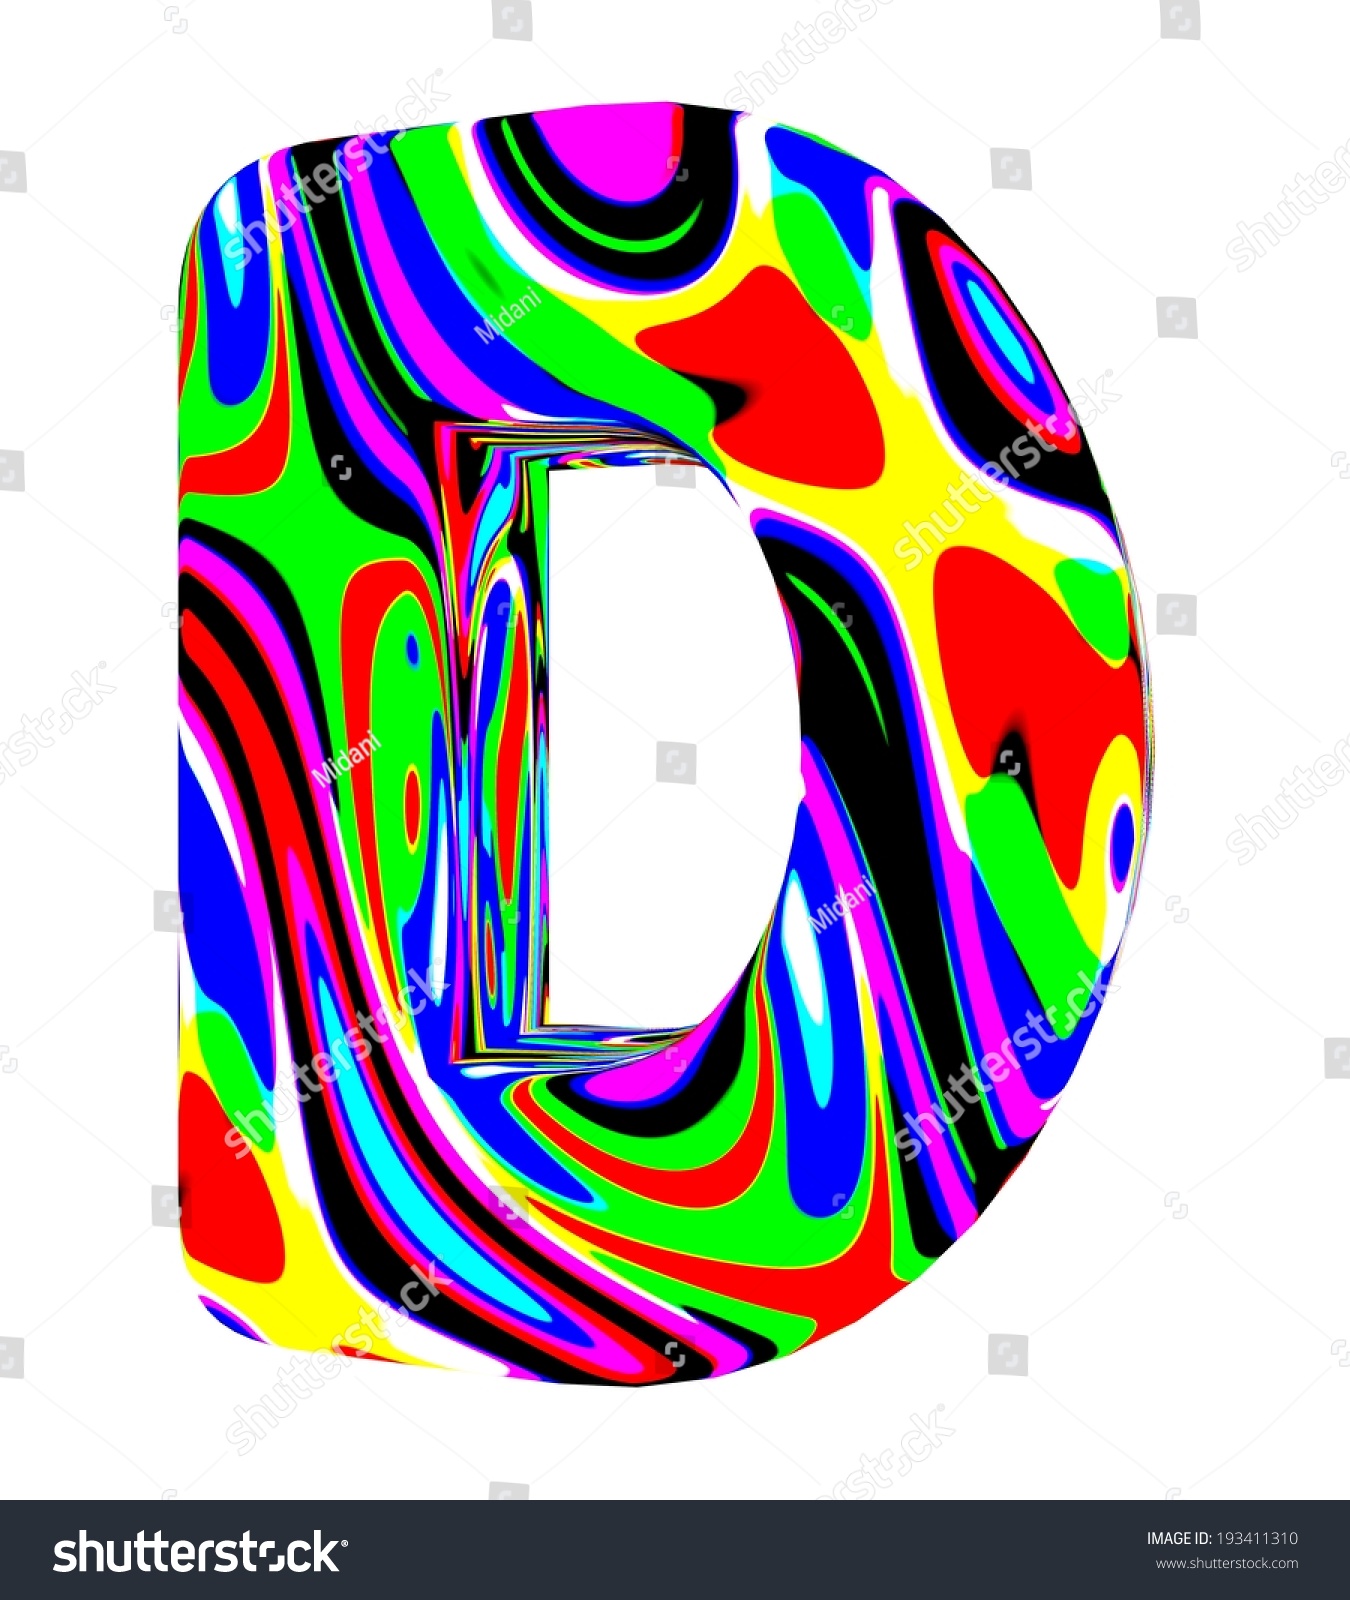 3d Letter D Colored With Bright Colors Stock Photo 193411310 : Shutterstock